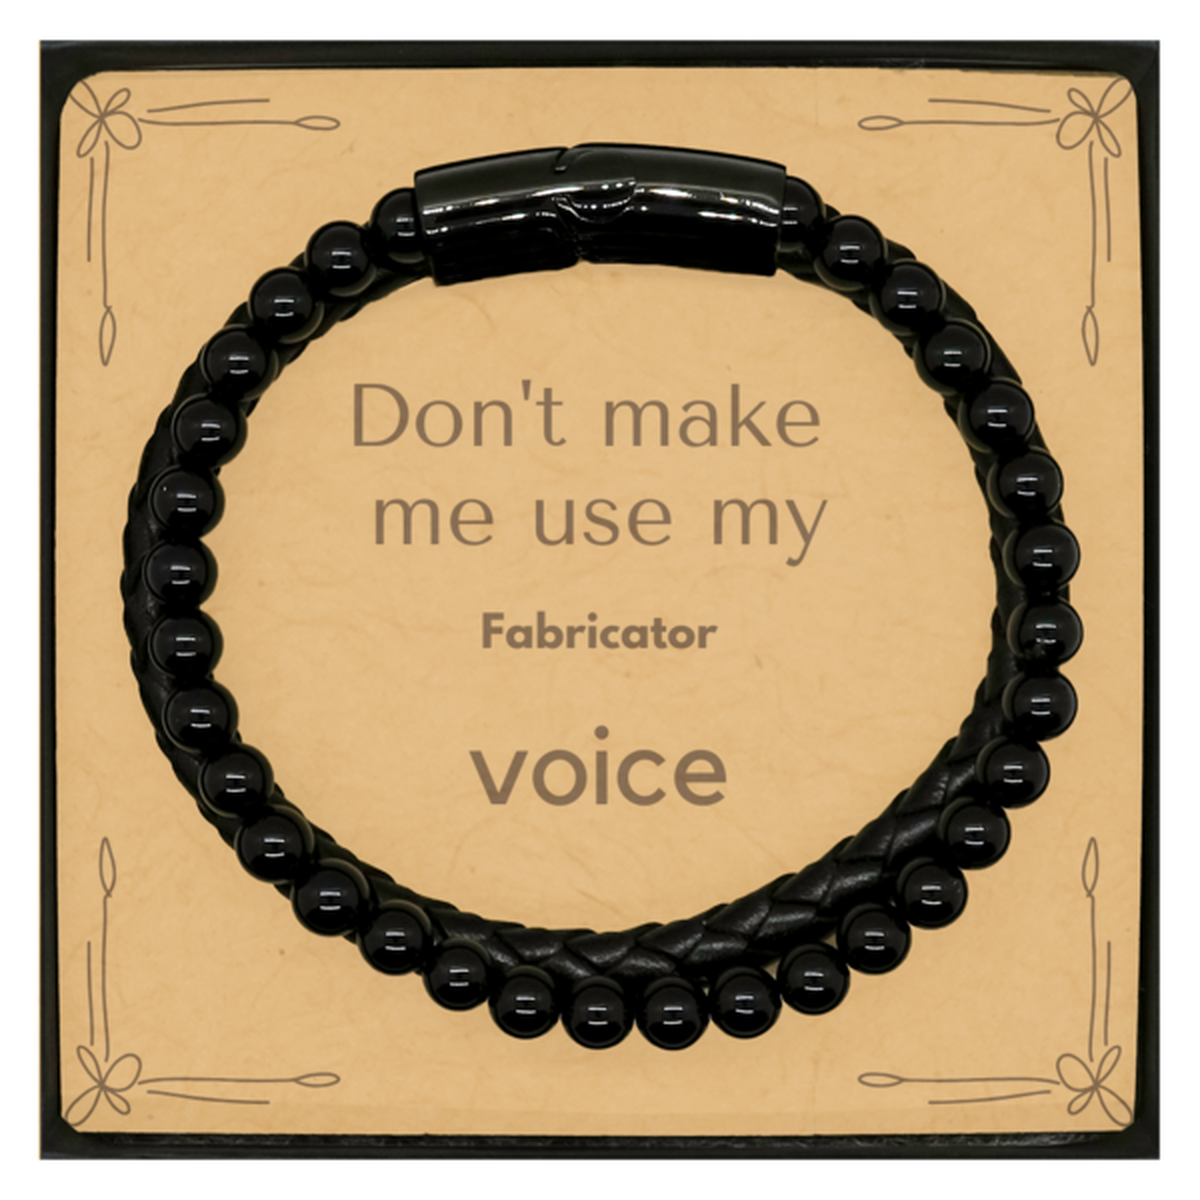 Don't make me use my Fabricator voice, Sarcasm Fabricator Card Gifts, Christmas Fabricator Stone Leather Bracelets Birthday Unique Gifts For Fabricator Coworkers, Men, Women, Colleague, Friends